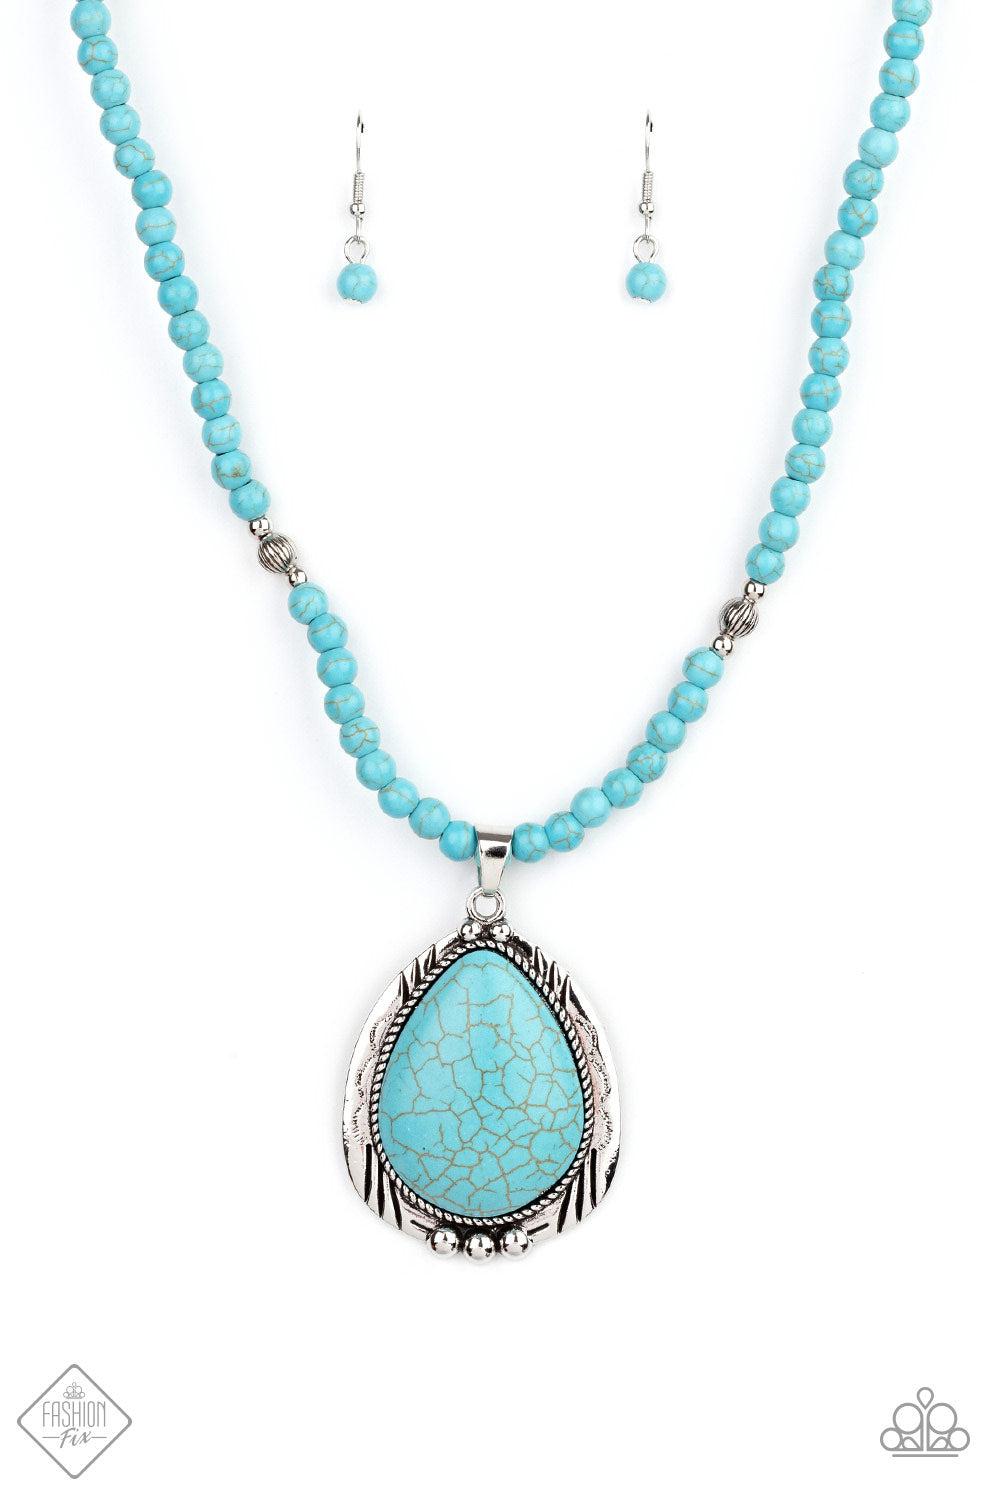 Paparazzi Evolution Blue Necklace. Turquoise Blue Stone Necklace. Subscribe & Save. 